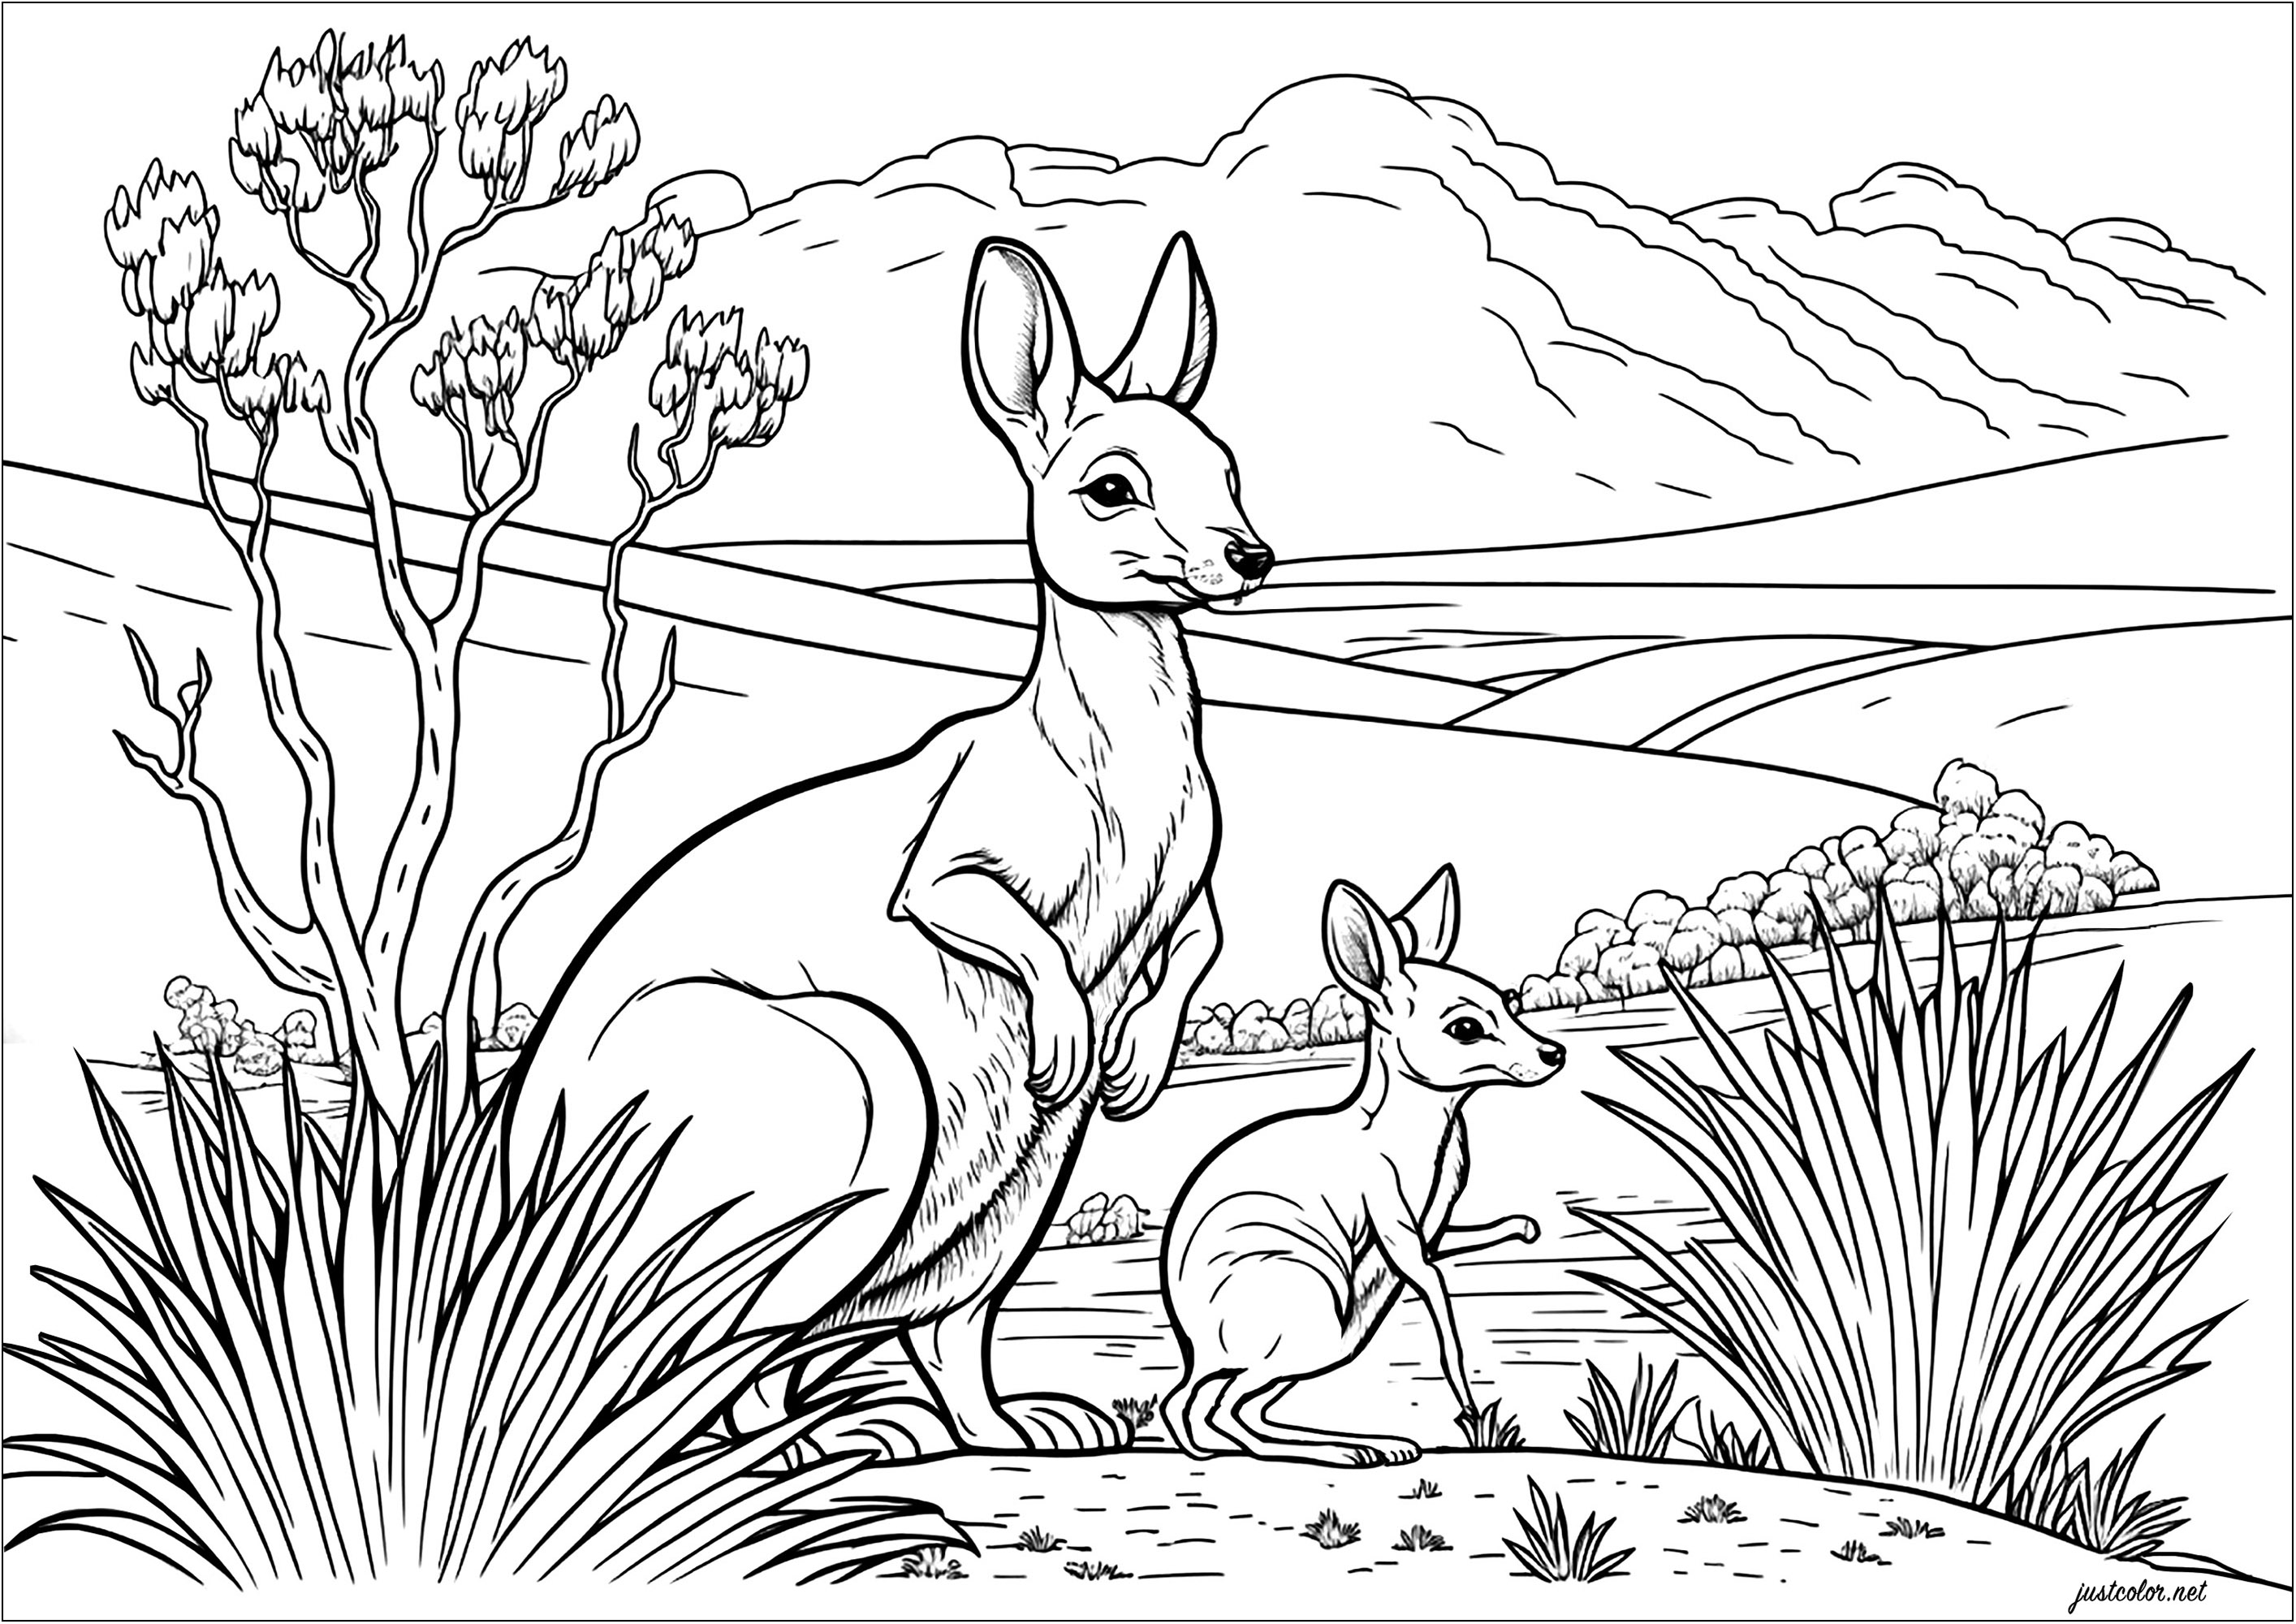 Color the Australian outback with a mother kangaroo and her joey. Explore the desert landscape with cacti and a sunny sky and use your imagination to bring this scene to life. Get creative with color and join the hopping fun with these two kangaroos !